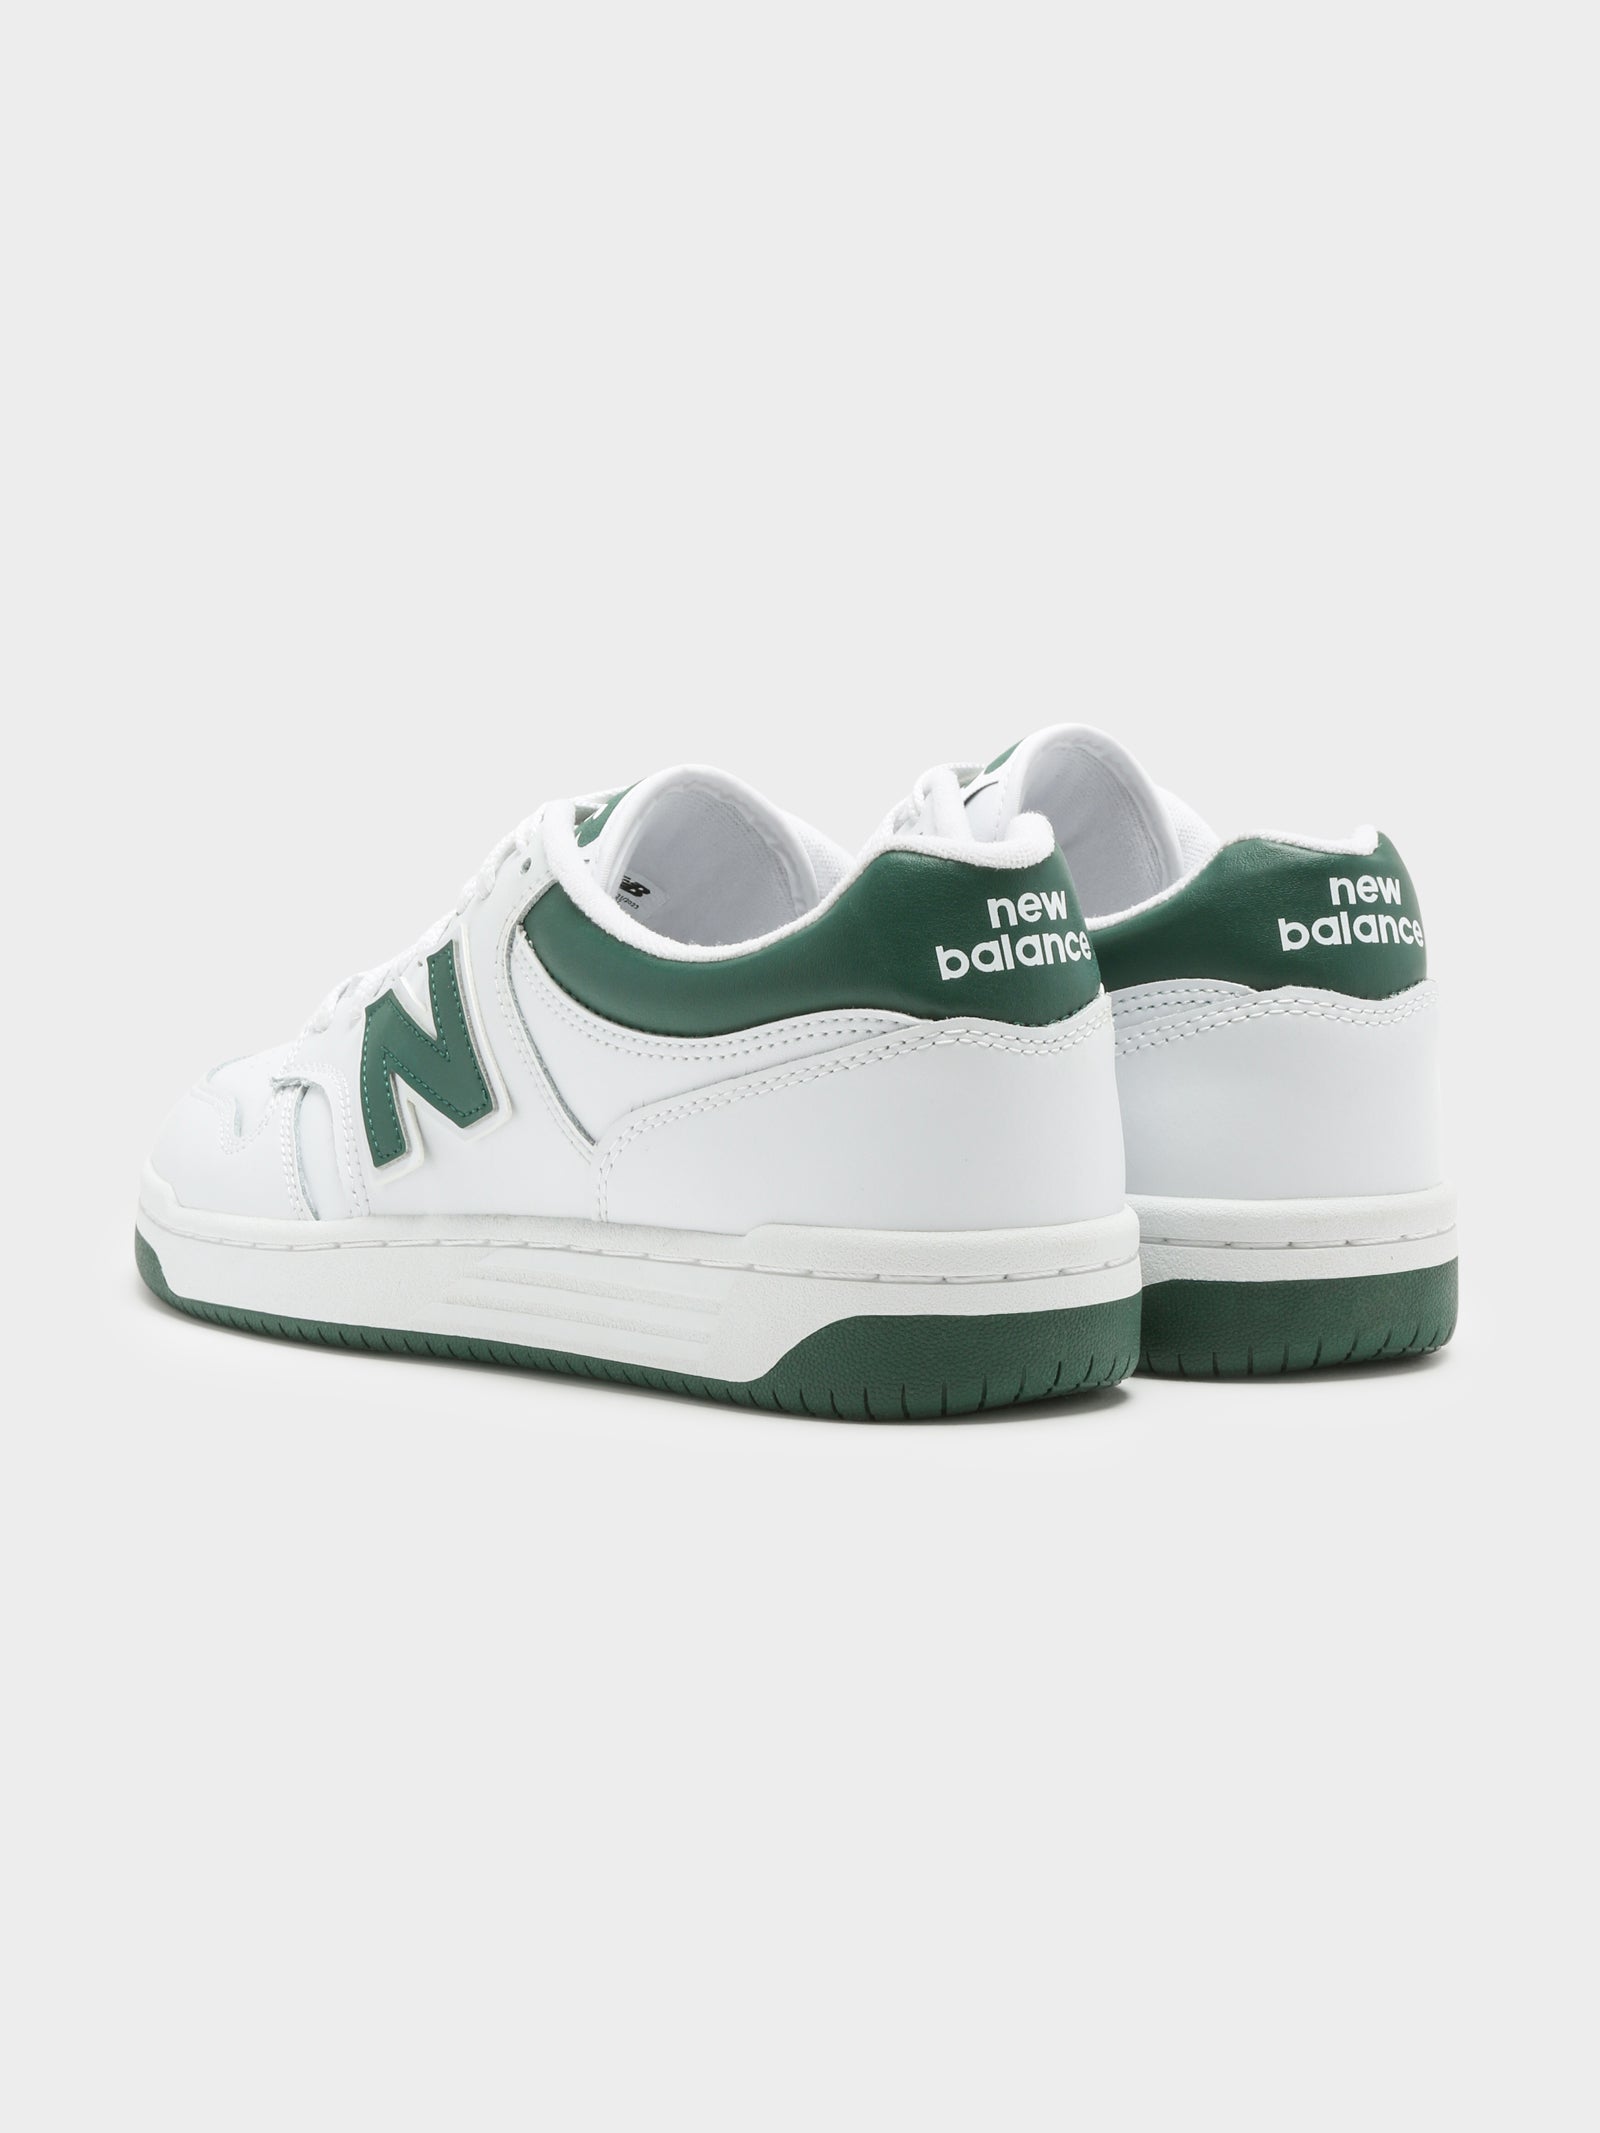 Unisex BB 480 Sneakers in White & Green